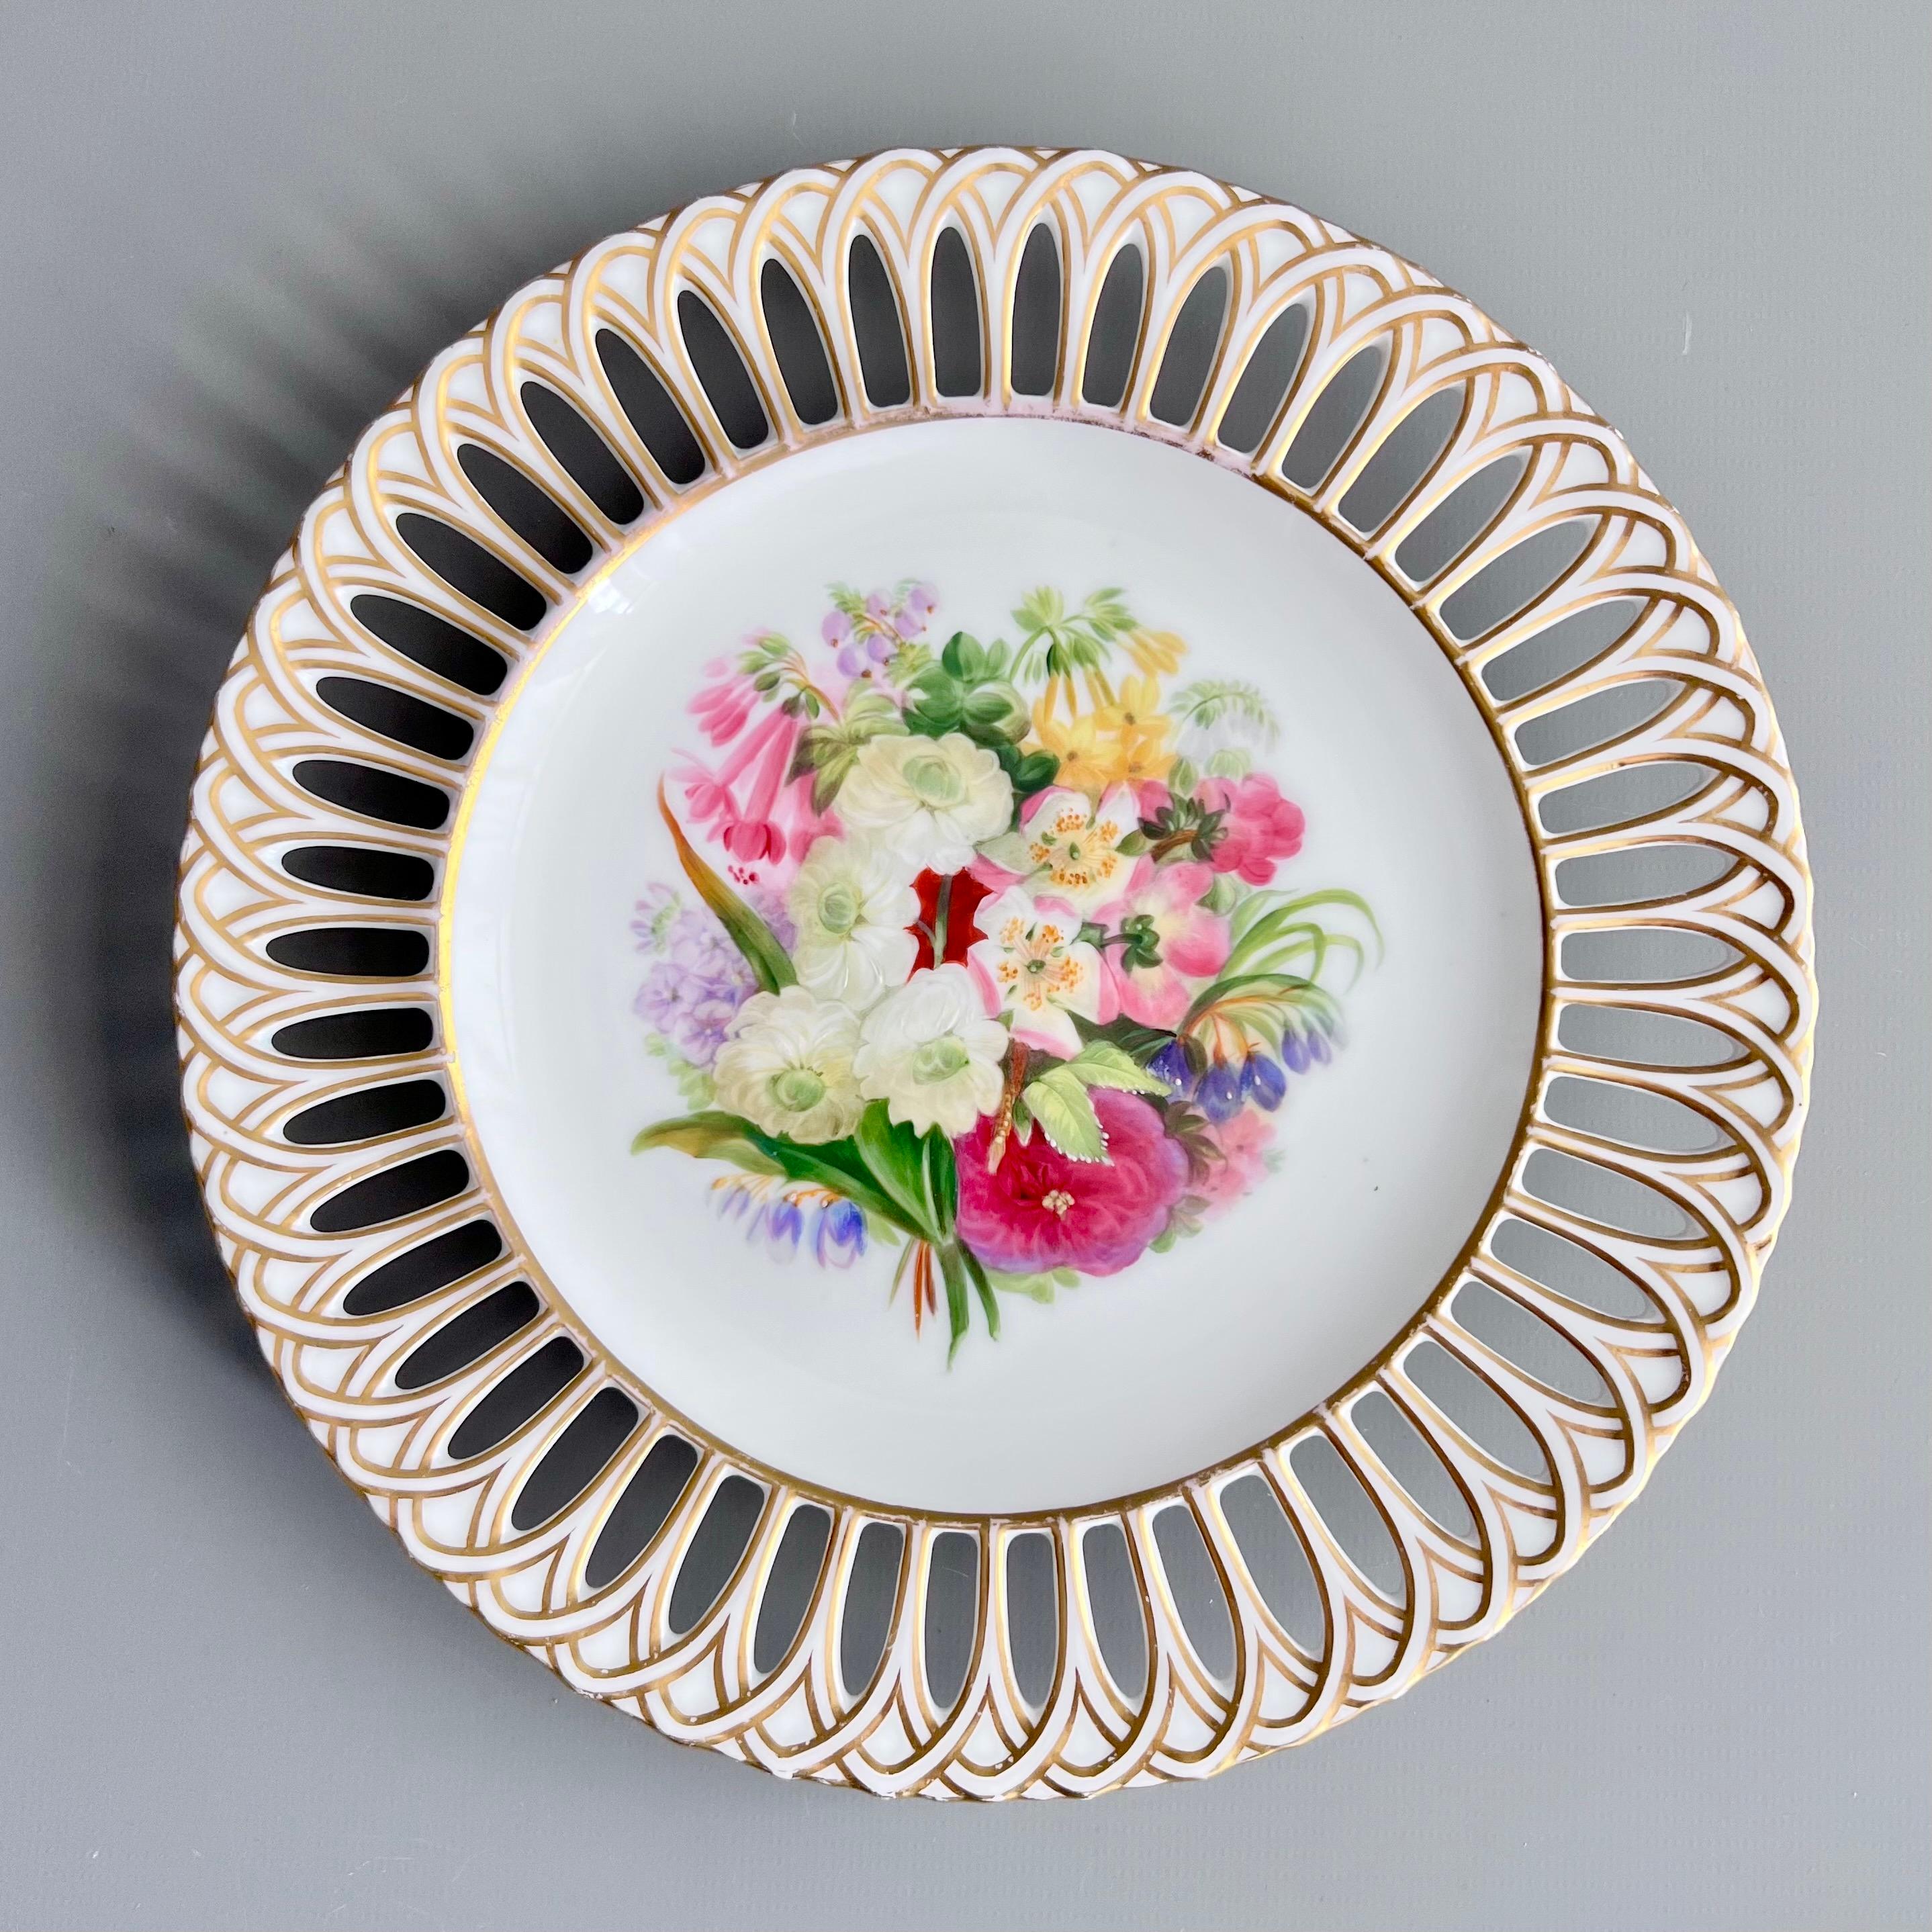 Mid-19th Century Set of 8 Plates by Copeland, Reticulated, Sublime Flowers by Greatbatch, 1848 For Sale